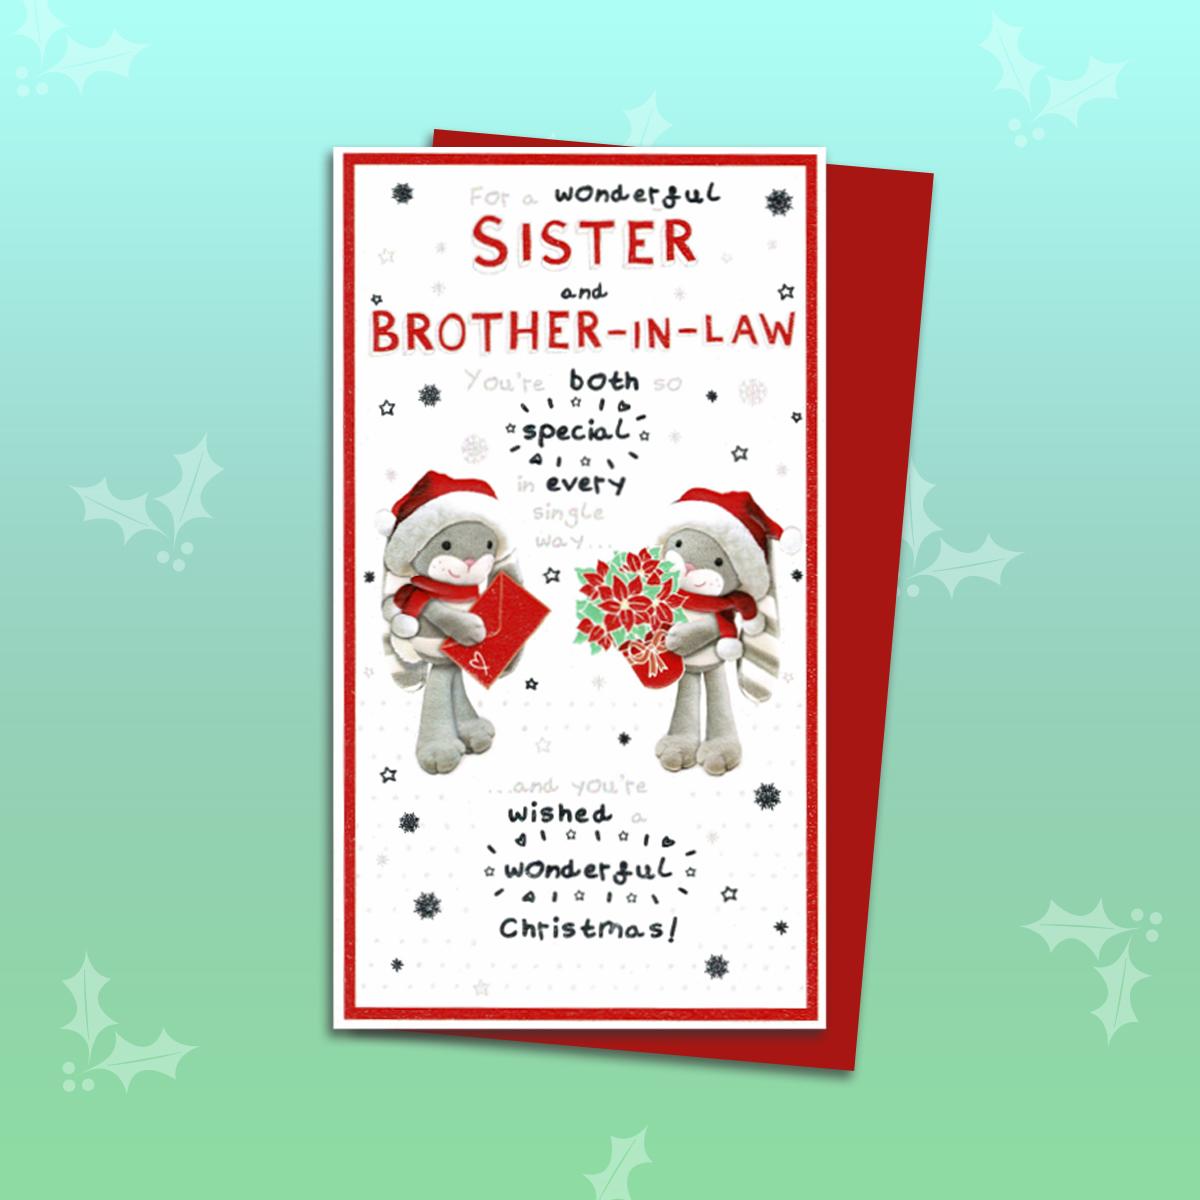 Sister & Brother In Law Christmas Card Alongside Its Red Envelope